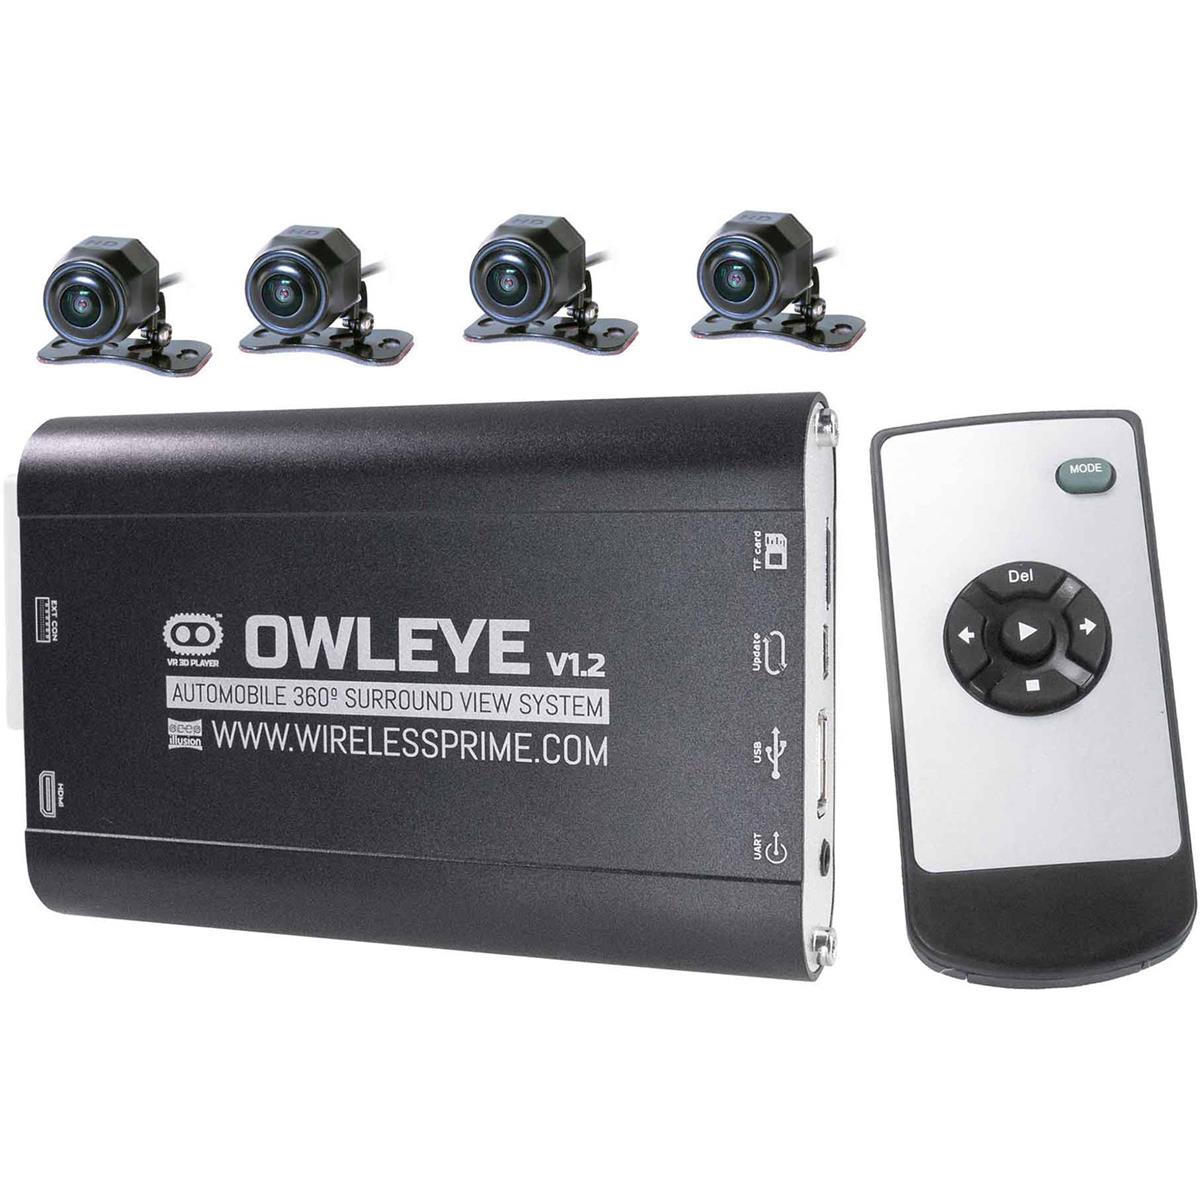 Image of Cinegears Owleye Automobile VR 360 DVR Surround View System for Commercial V1.2